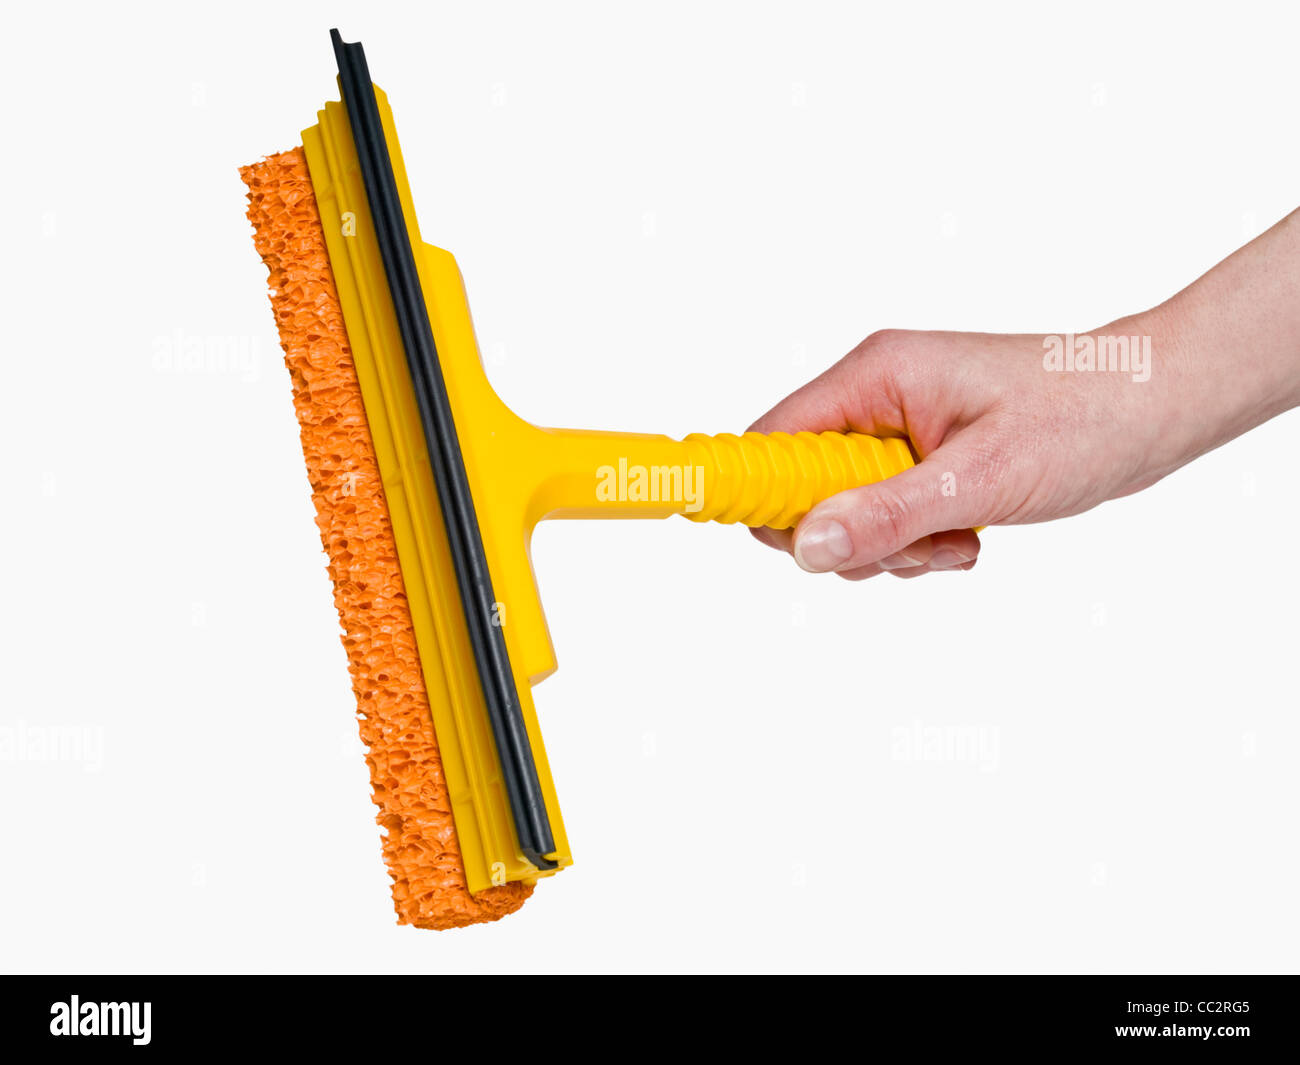 a squeegee is hand-held Stock Photo